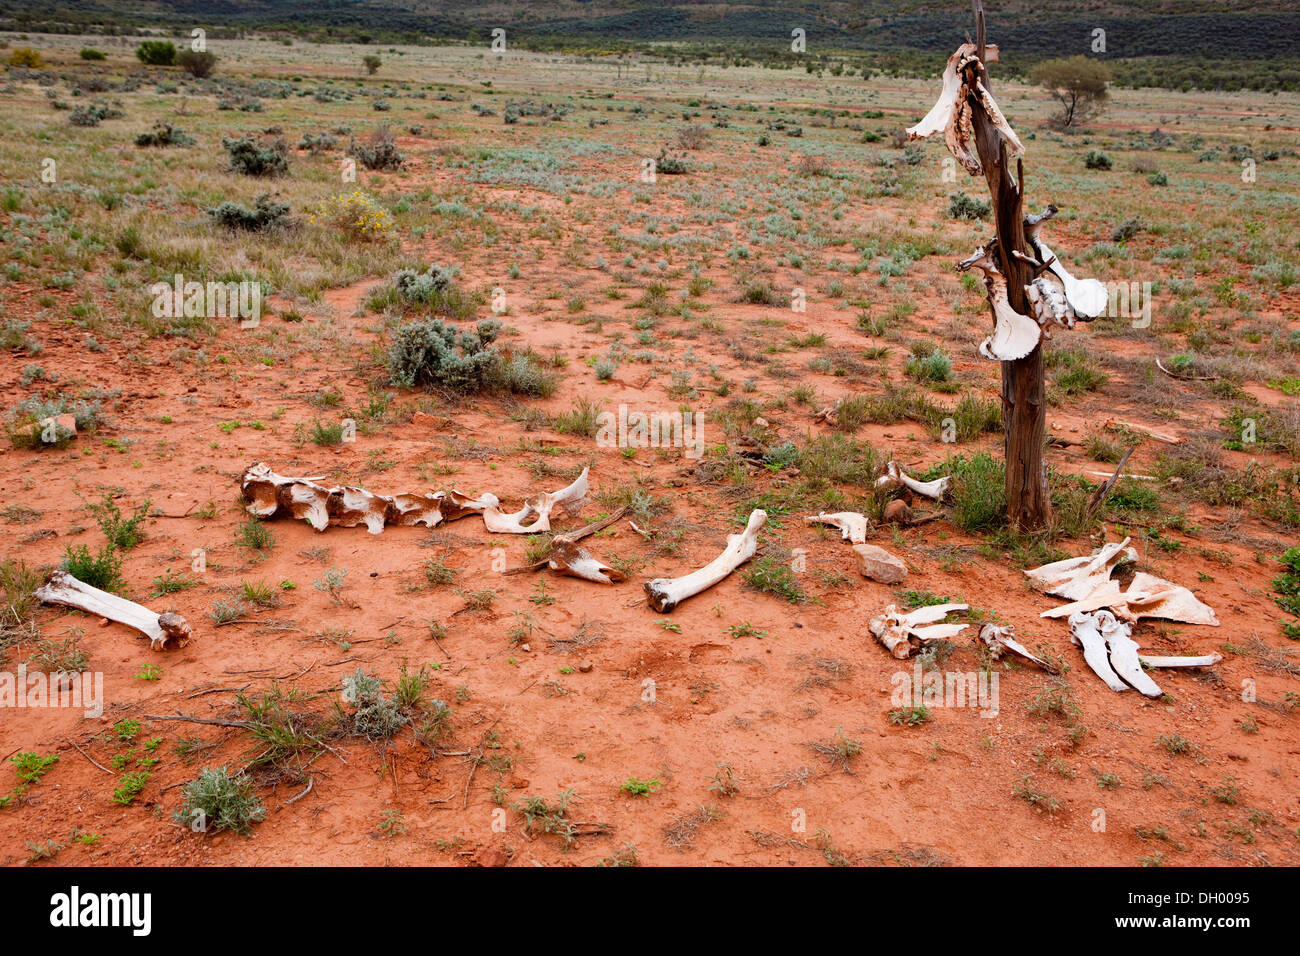 Camel bones in the outback, Northern Territory, Australia Stock Photo